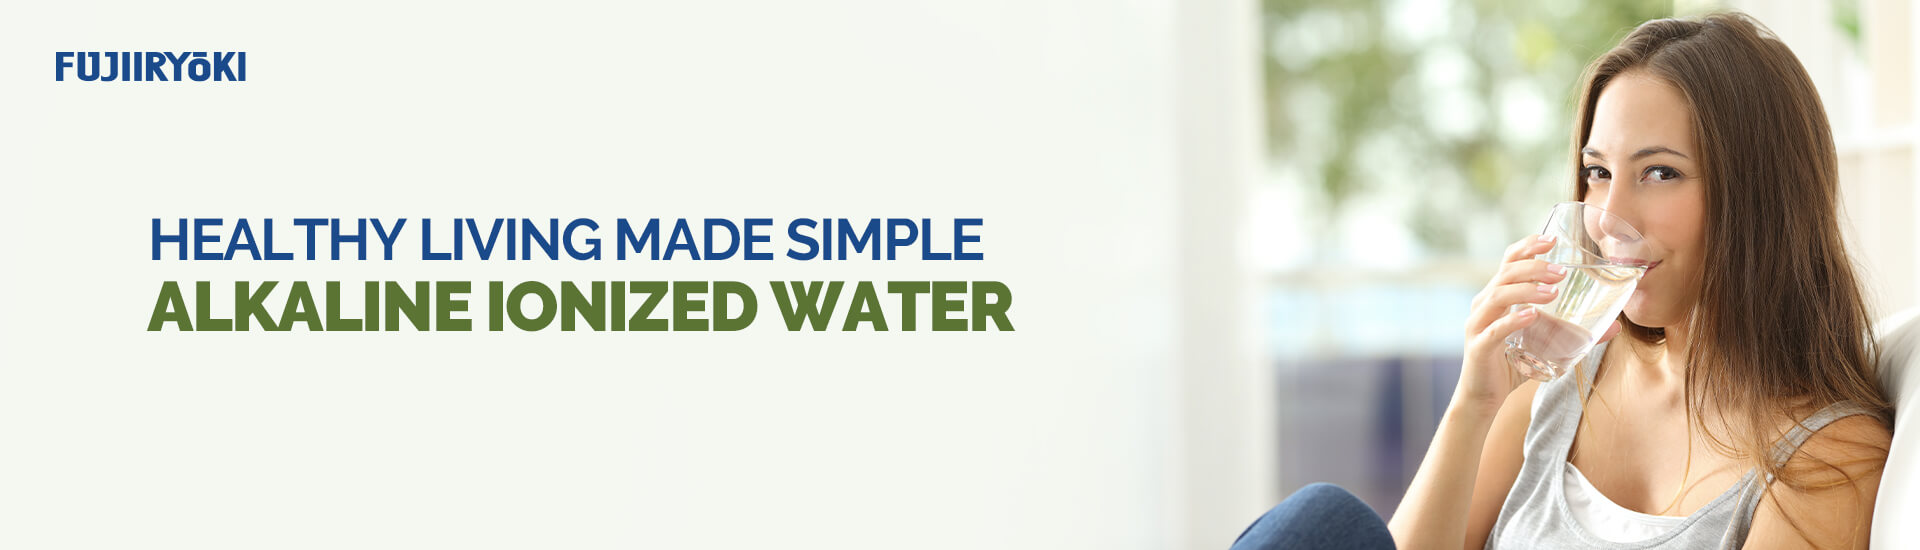 Healthy living made simple with alkaline ionized water